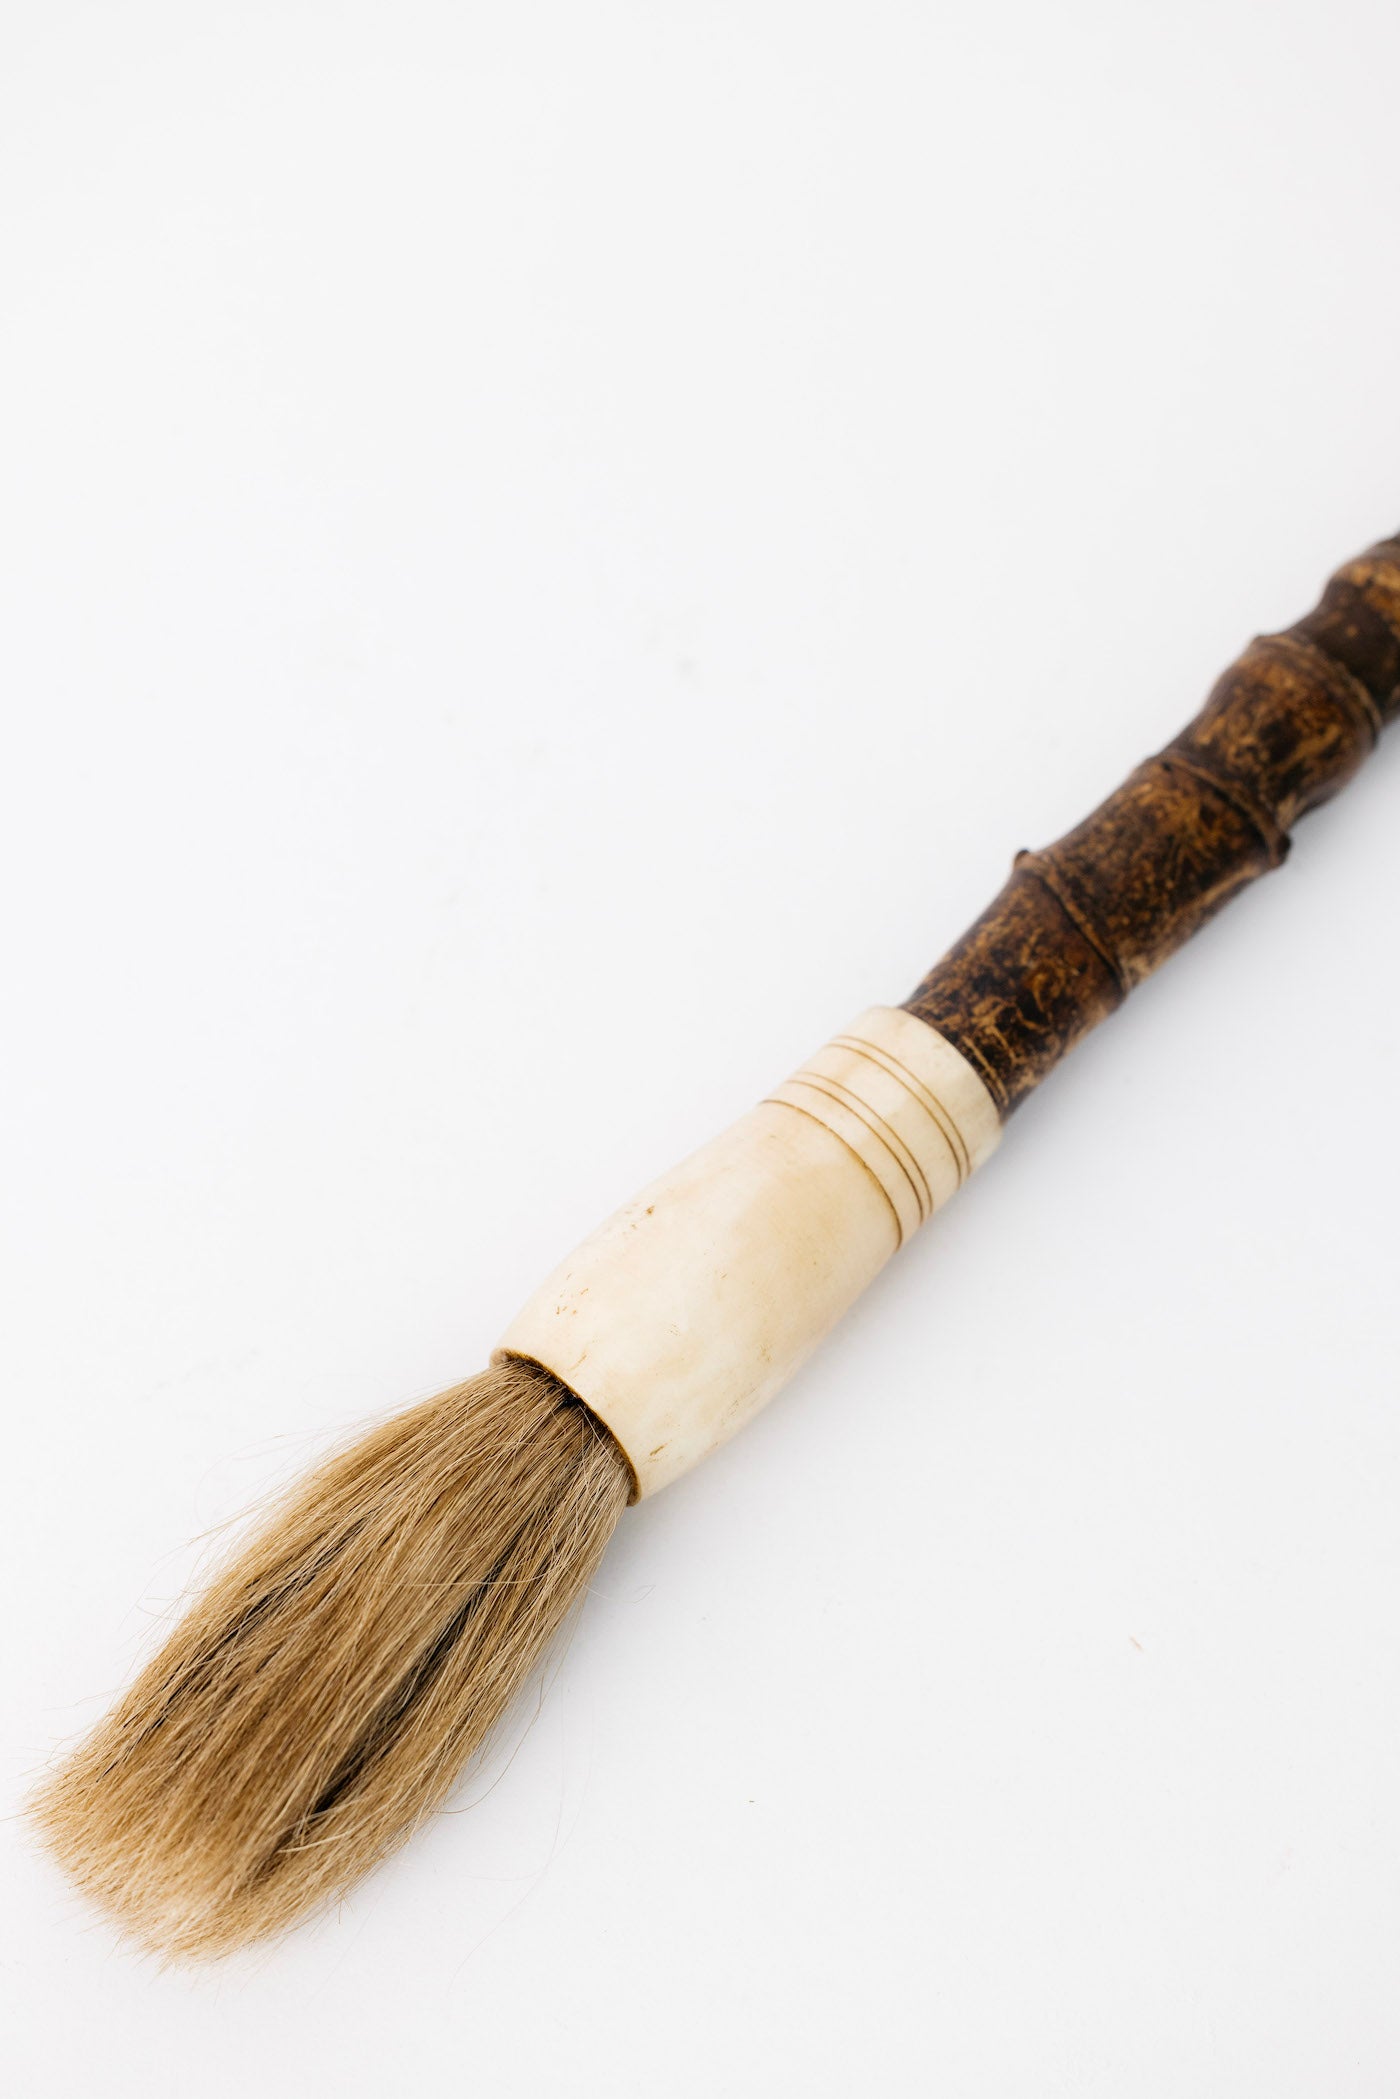 Imperial Caligraphy Brush - Wood